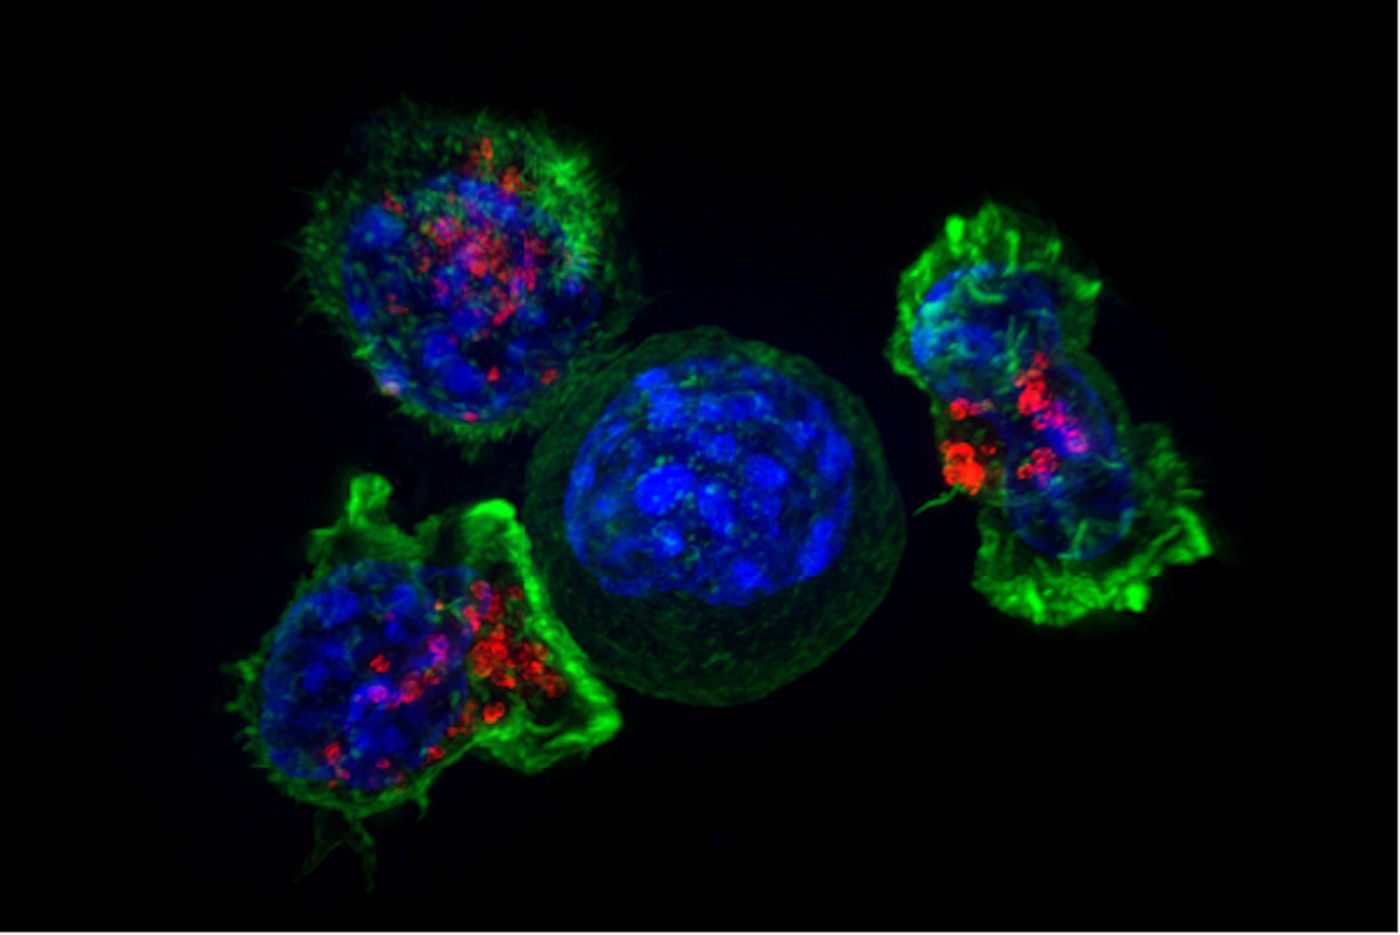 A group of killer T cells (green and red) surround a cancer cell (blue, center) / Credit: National Institutes of Health/NCI/Alex Ritter, Jennifer Lippincott Schwartz, and Gillian Griffiths